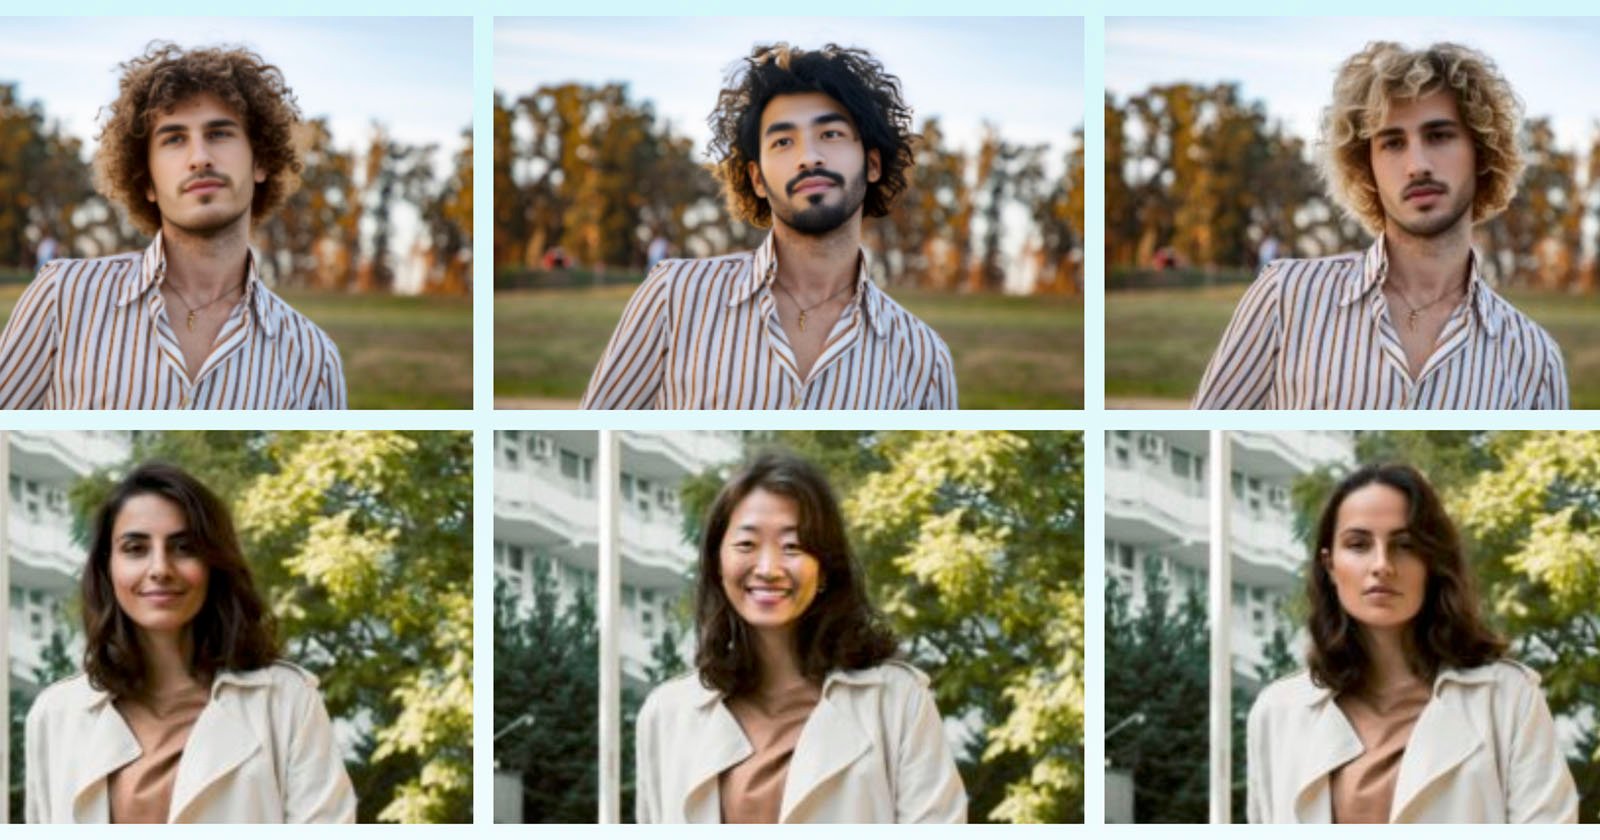 PiktID Uses AI to Generate Unique New Faces for Commercial Photography